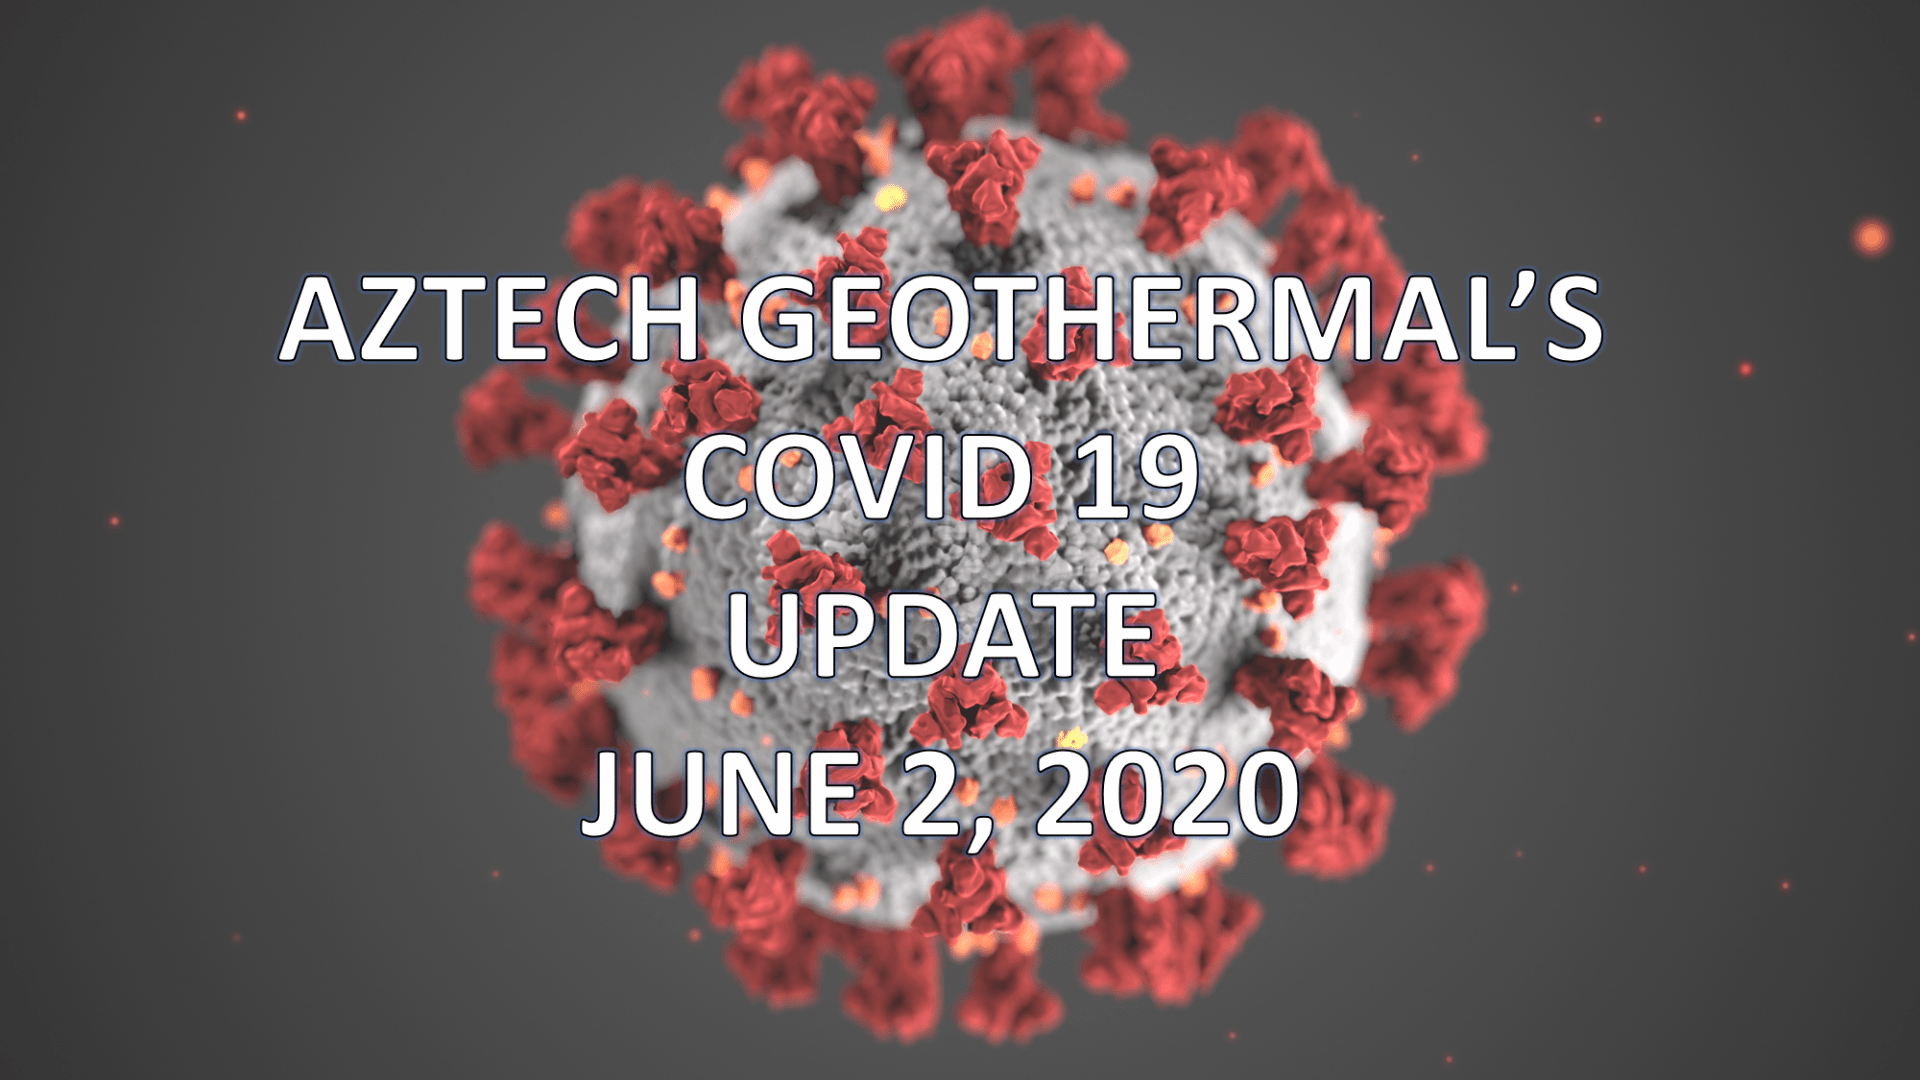 Aztech Geothermal's COVID 19 Update